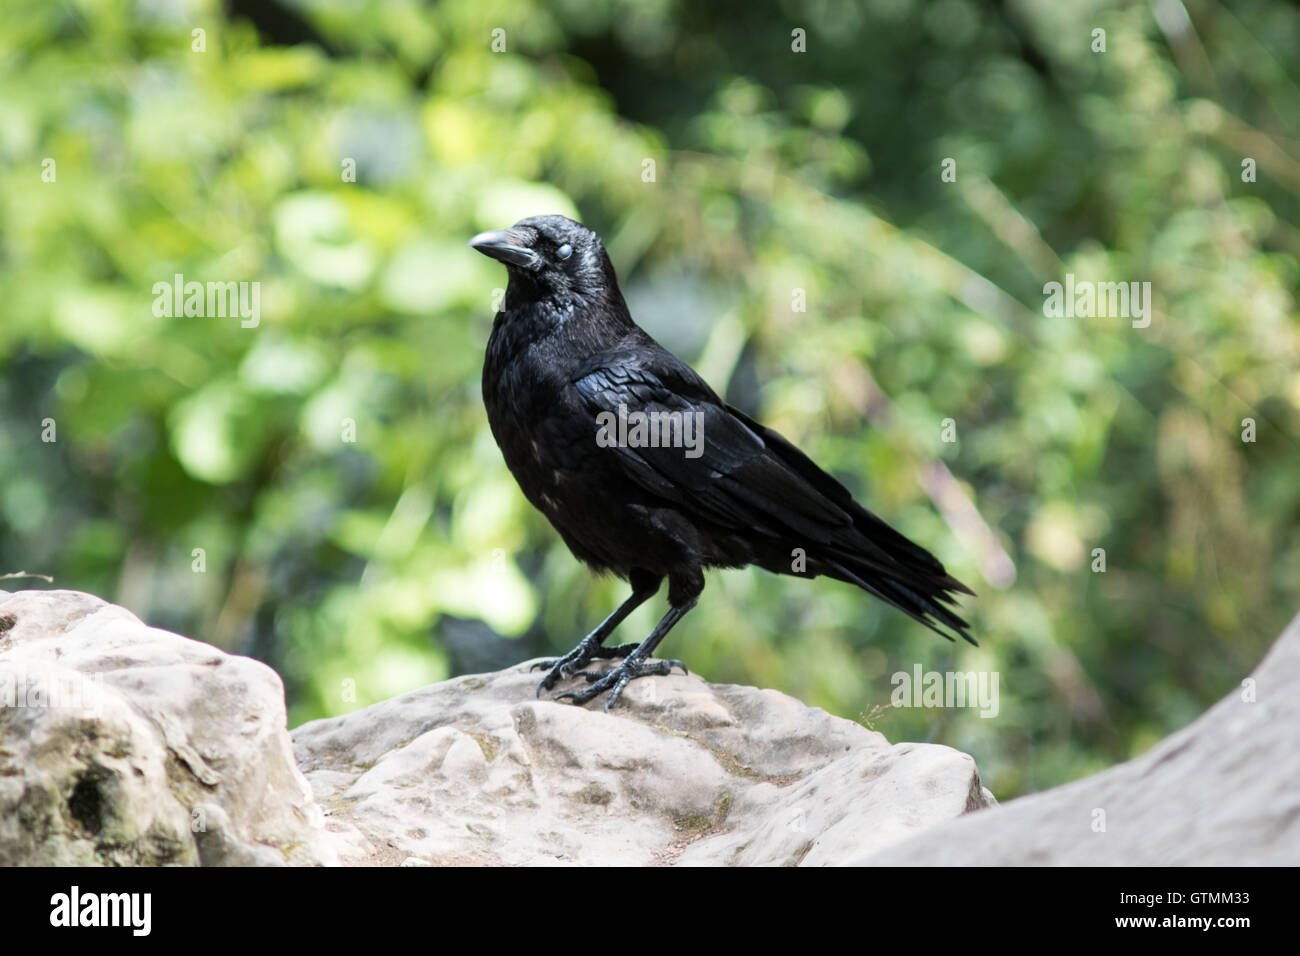 Black Bird perched on a rock Stock Photo